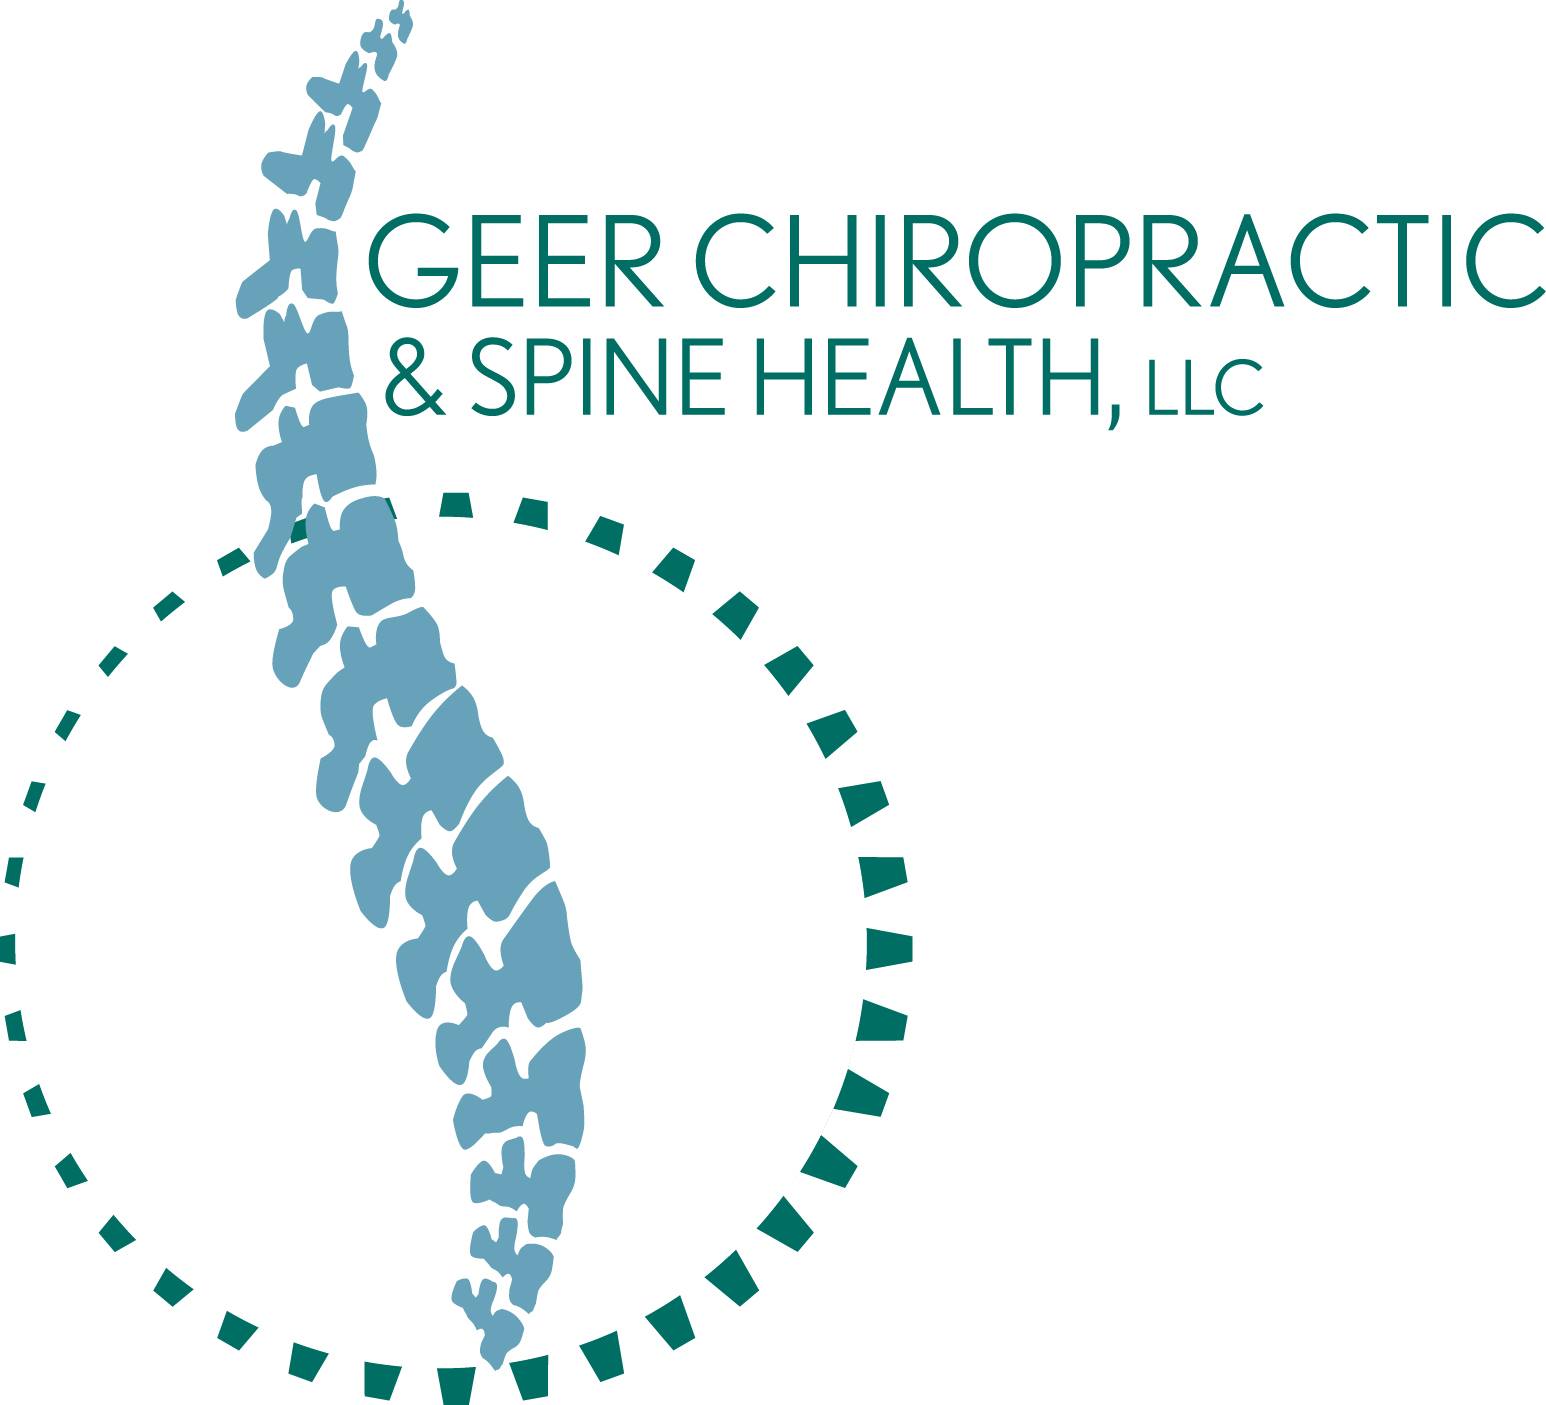 Geer Logo - Geer Chiropractic & Spine Health comes to Brighton - The Brighton Buzz